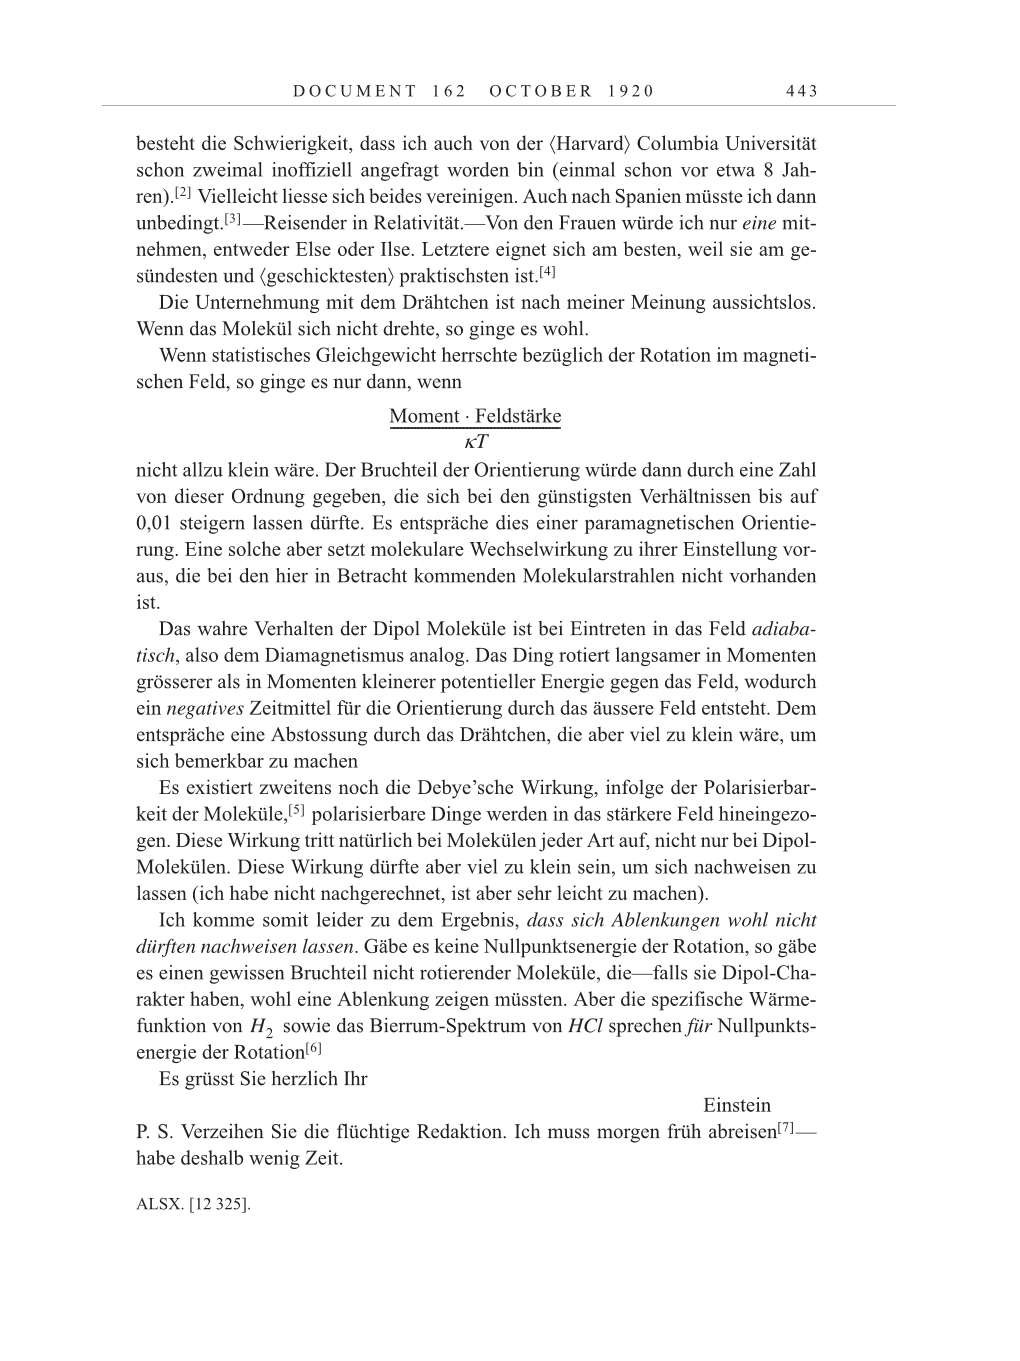 Volume 10: The Berlin Years: Correspondence May-December 1920 / Supplementary Correspondence 1909-1920 page 443